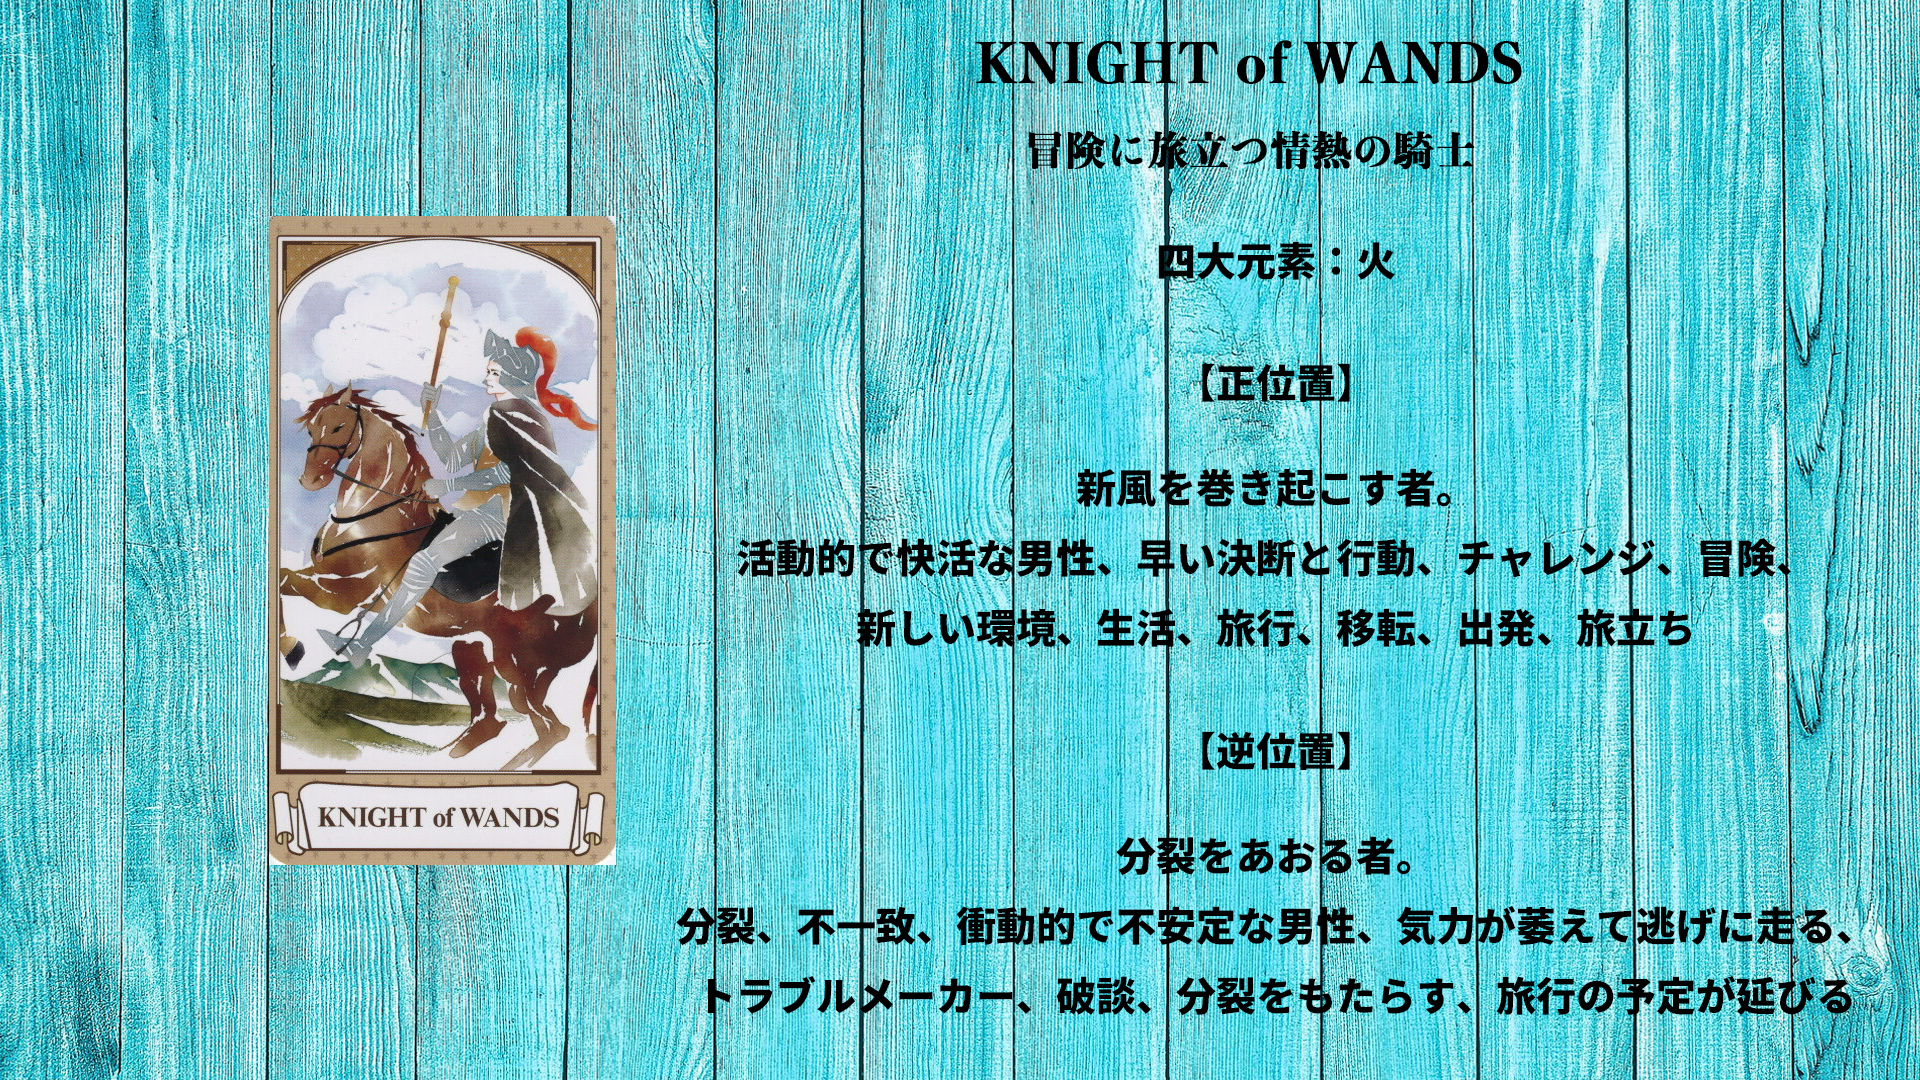 33_KNIGHT of WANDS